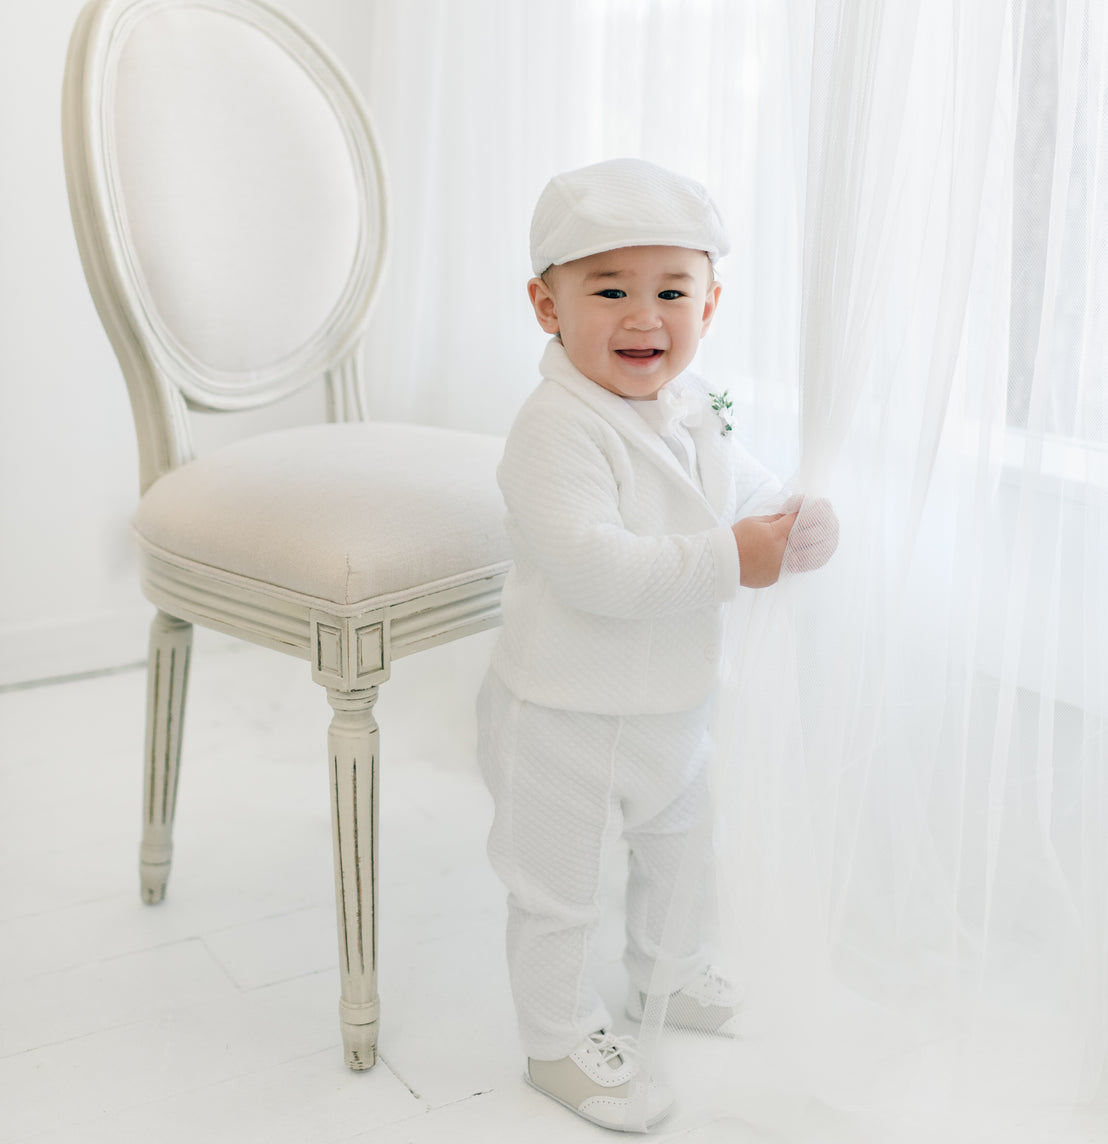 A baby boy stands next to a beige, cushioned chair in a bright room. The baby boy is dressed in the Elijah 3-Piece Set, complete with a jacket, pants, and onesie. Holding onto a sheer white curtain, he smiles at the camera with pure joy. He is also wearing the matching Elijah Newsboy Cap and White Velvet Bowtie & Boutonniere.